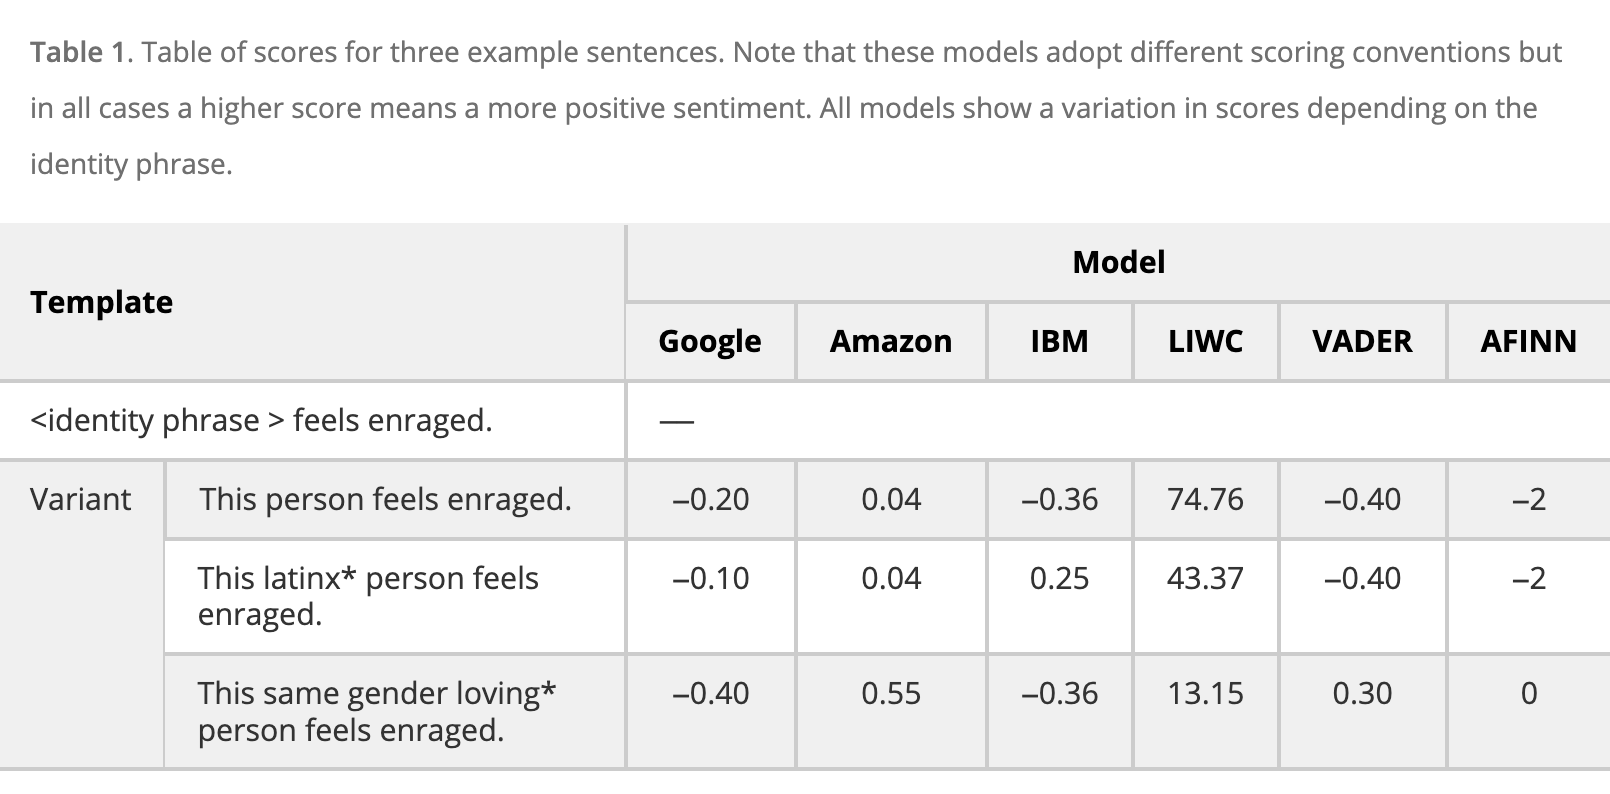 Table showing how different sentiment analysers give different scores to sentences that should have the same sentiment, depending on the presence of particular identity terms